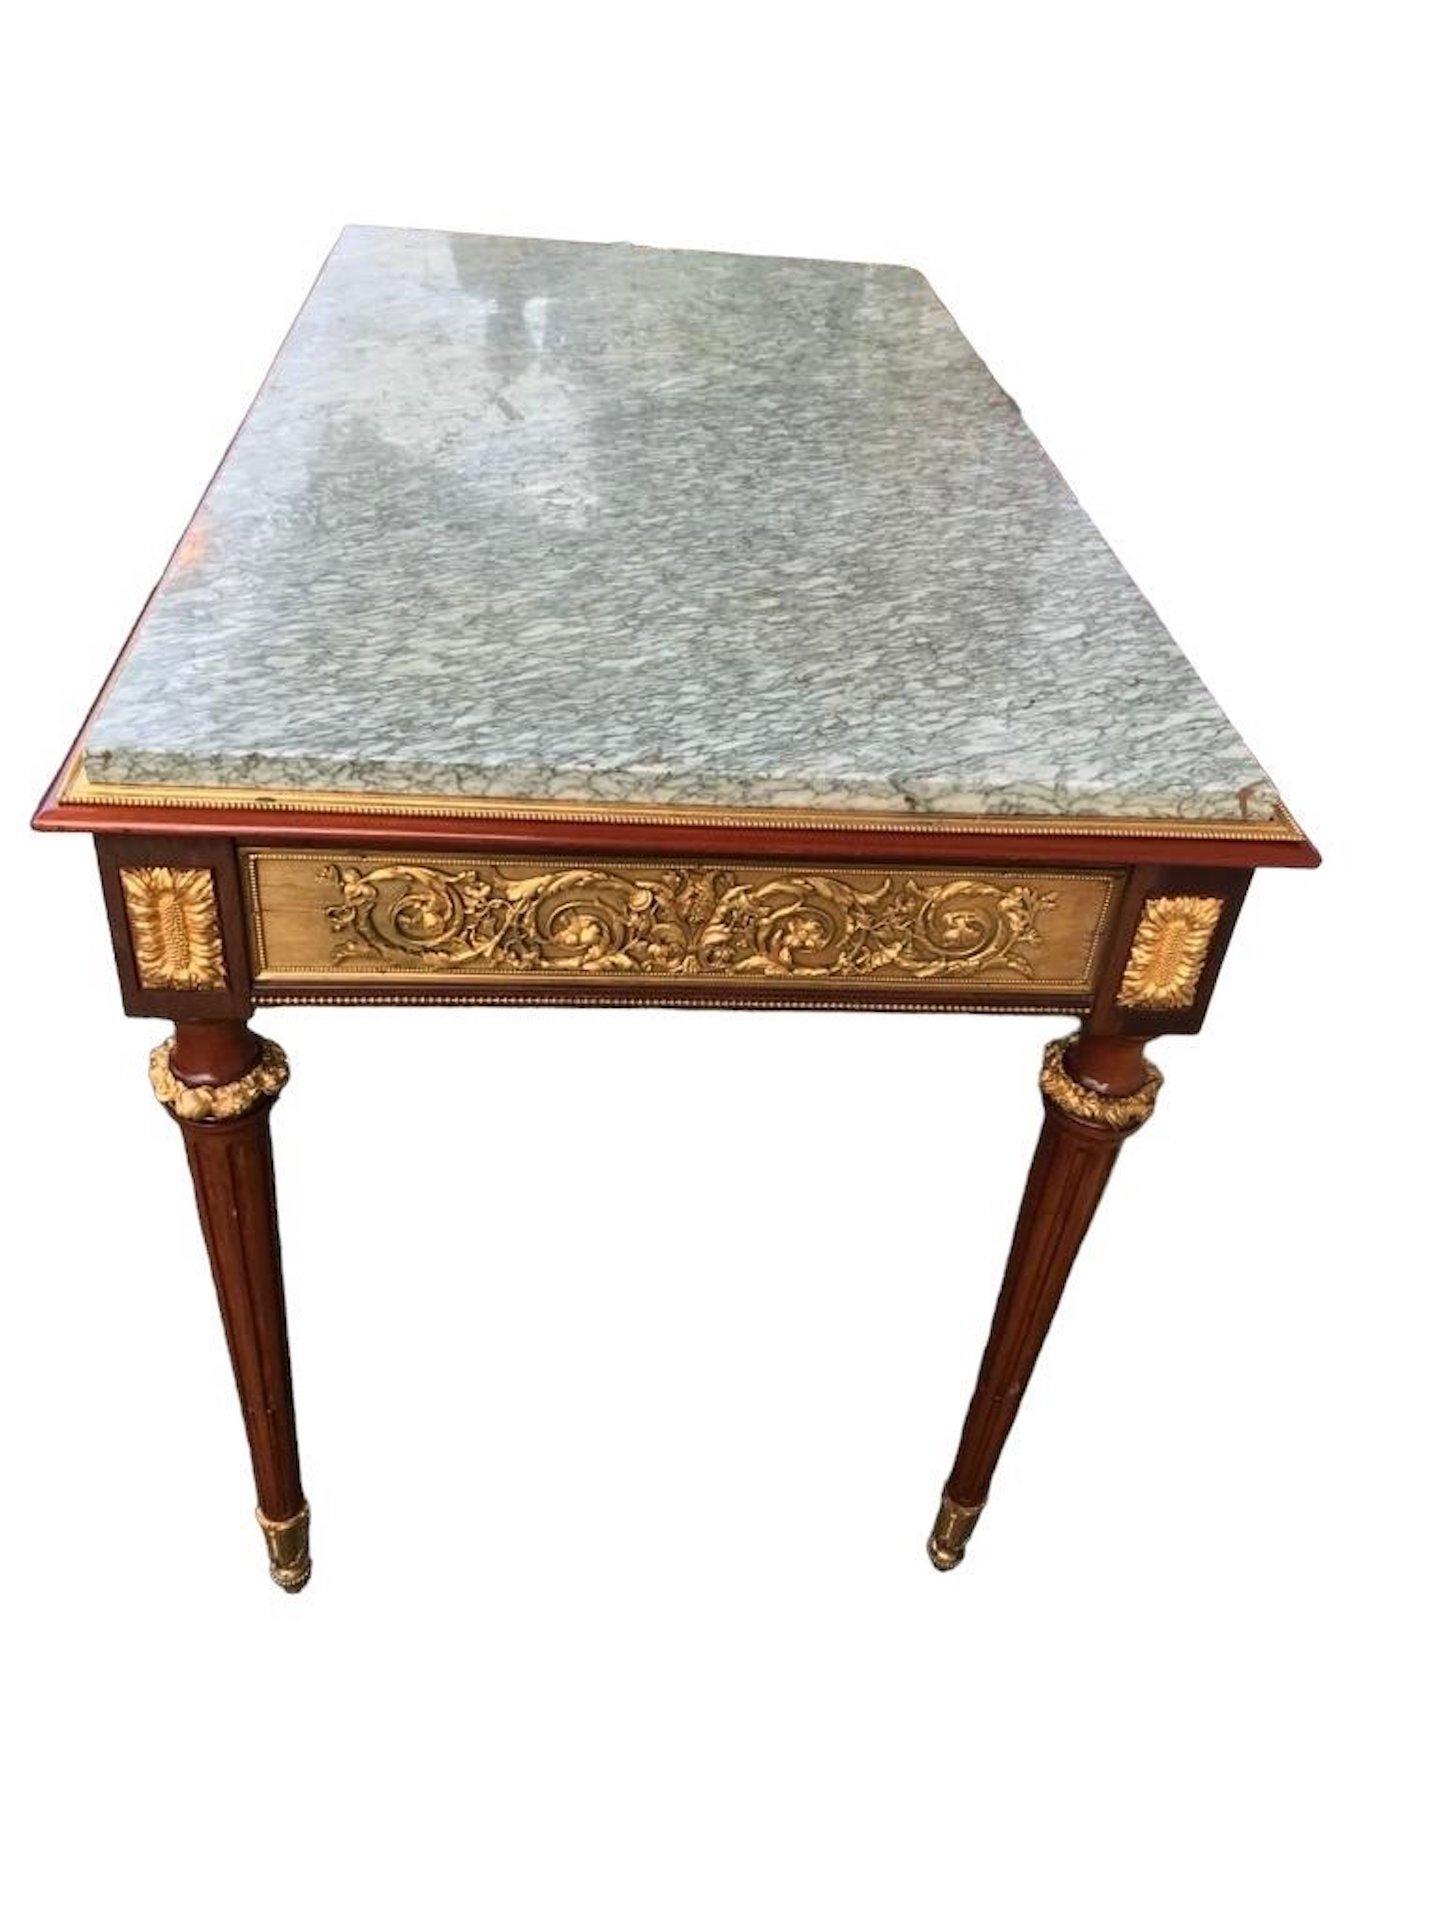 19th Century Mahogany, Gilt Bronze and Marble Middle Table, Napoleon III Period For Sale